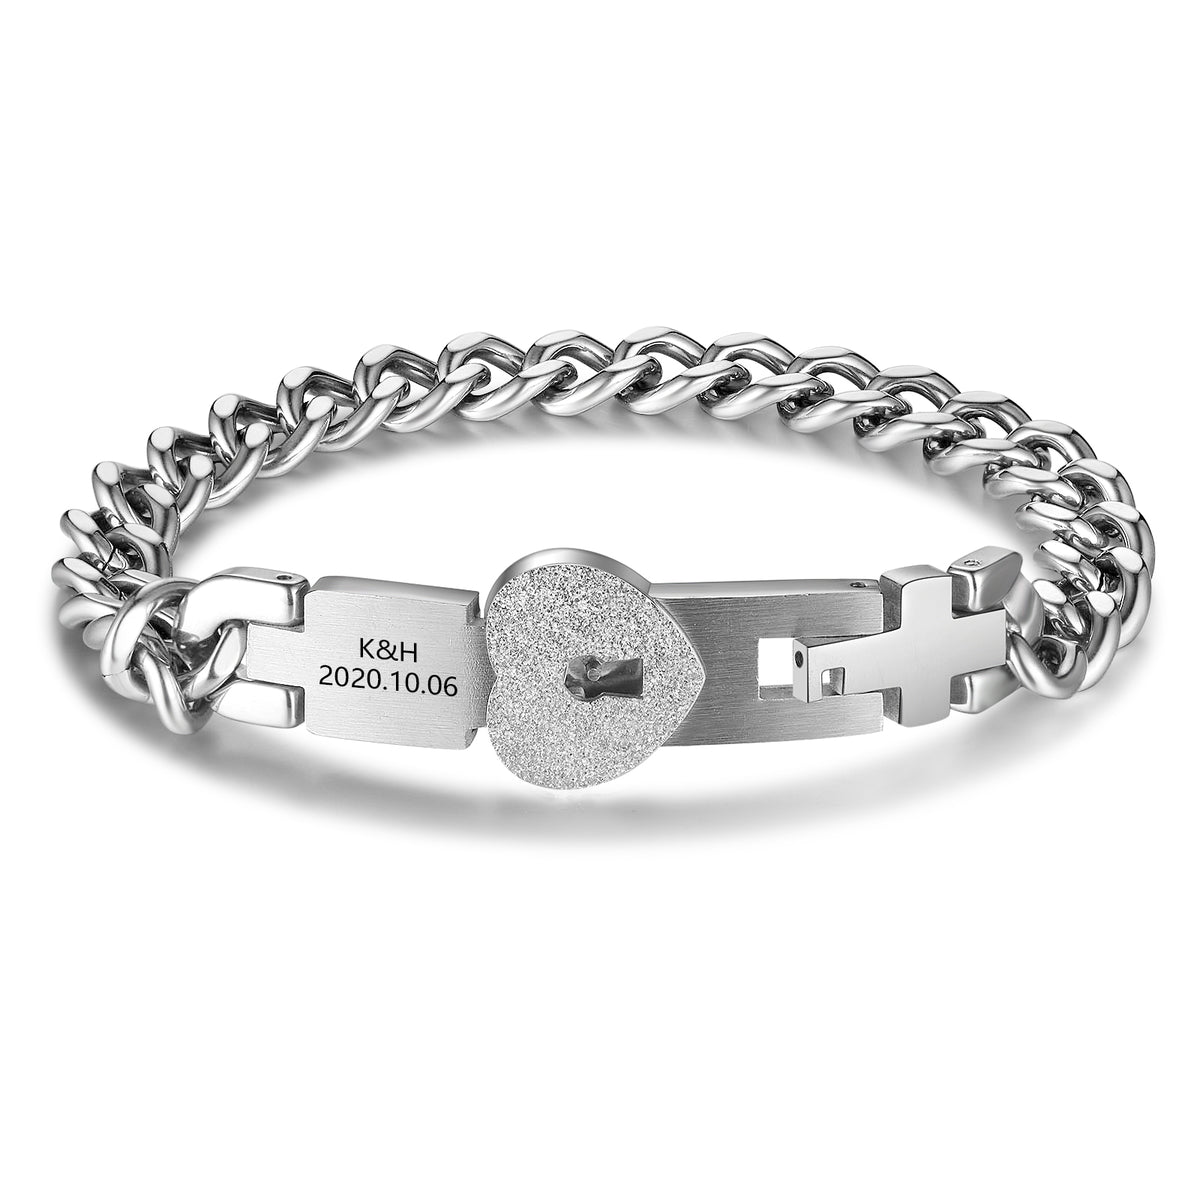 Personalized Magnetic Couple Matching Bracelets For Couples With Lock Key  And Friendship Rope Set Of 2 From Cartersliver, $7.55 | DHgate.Com